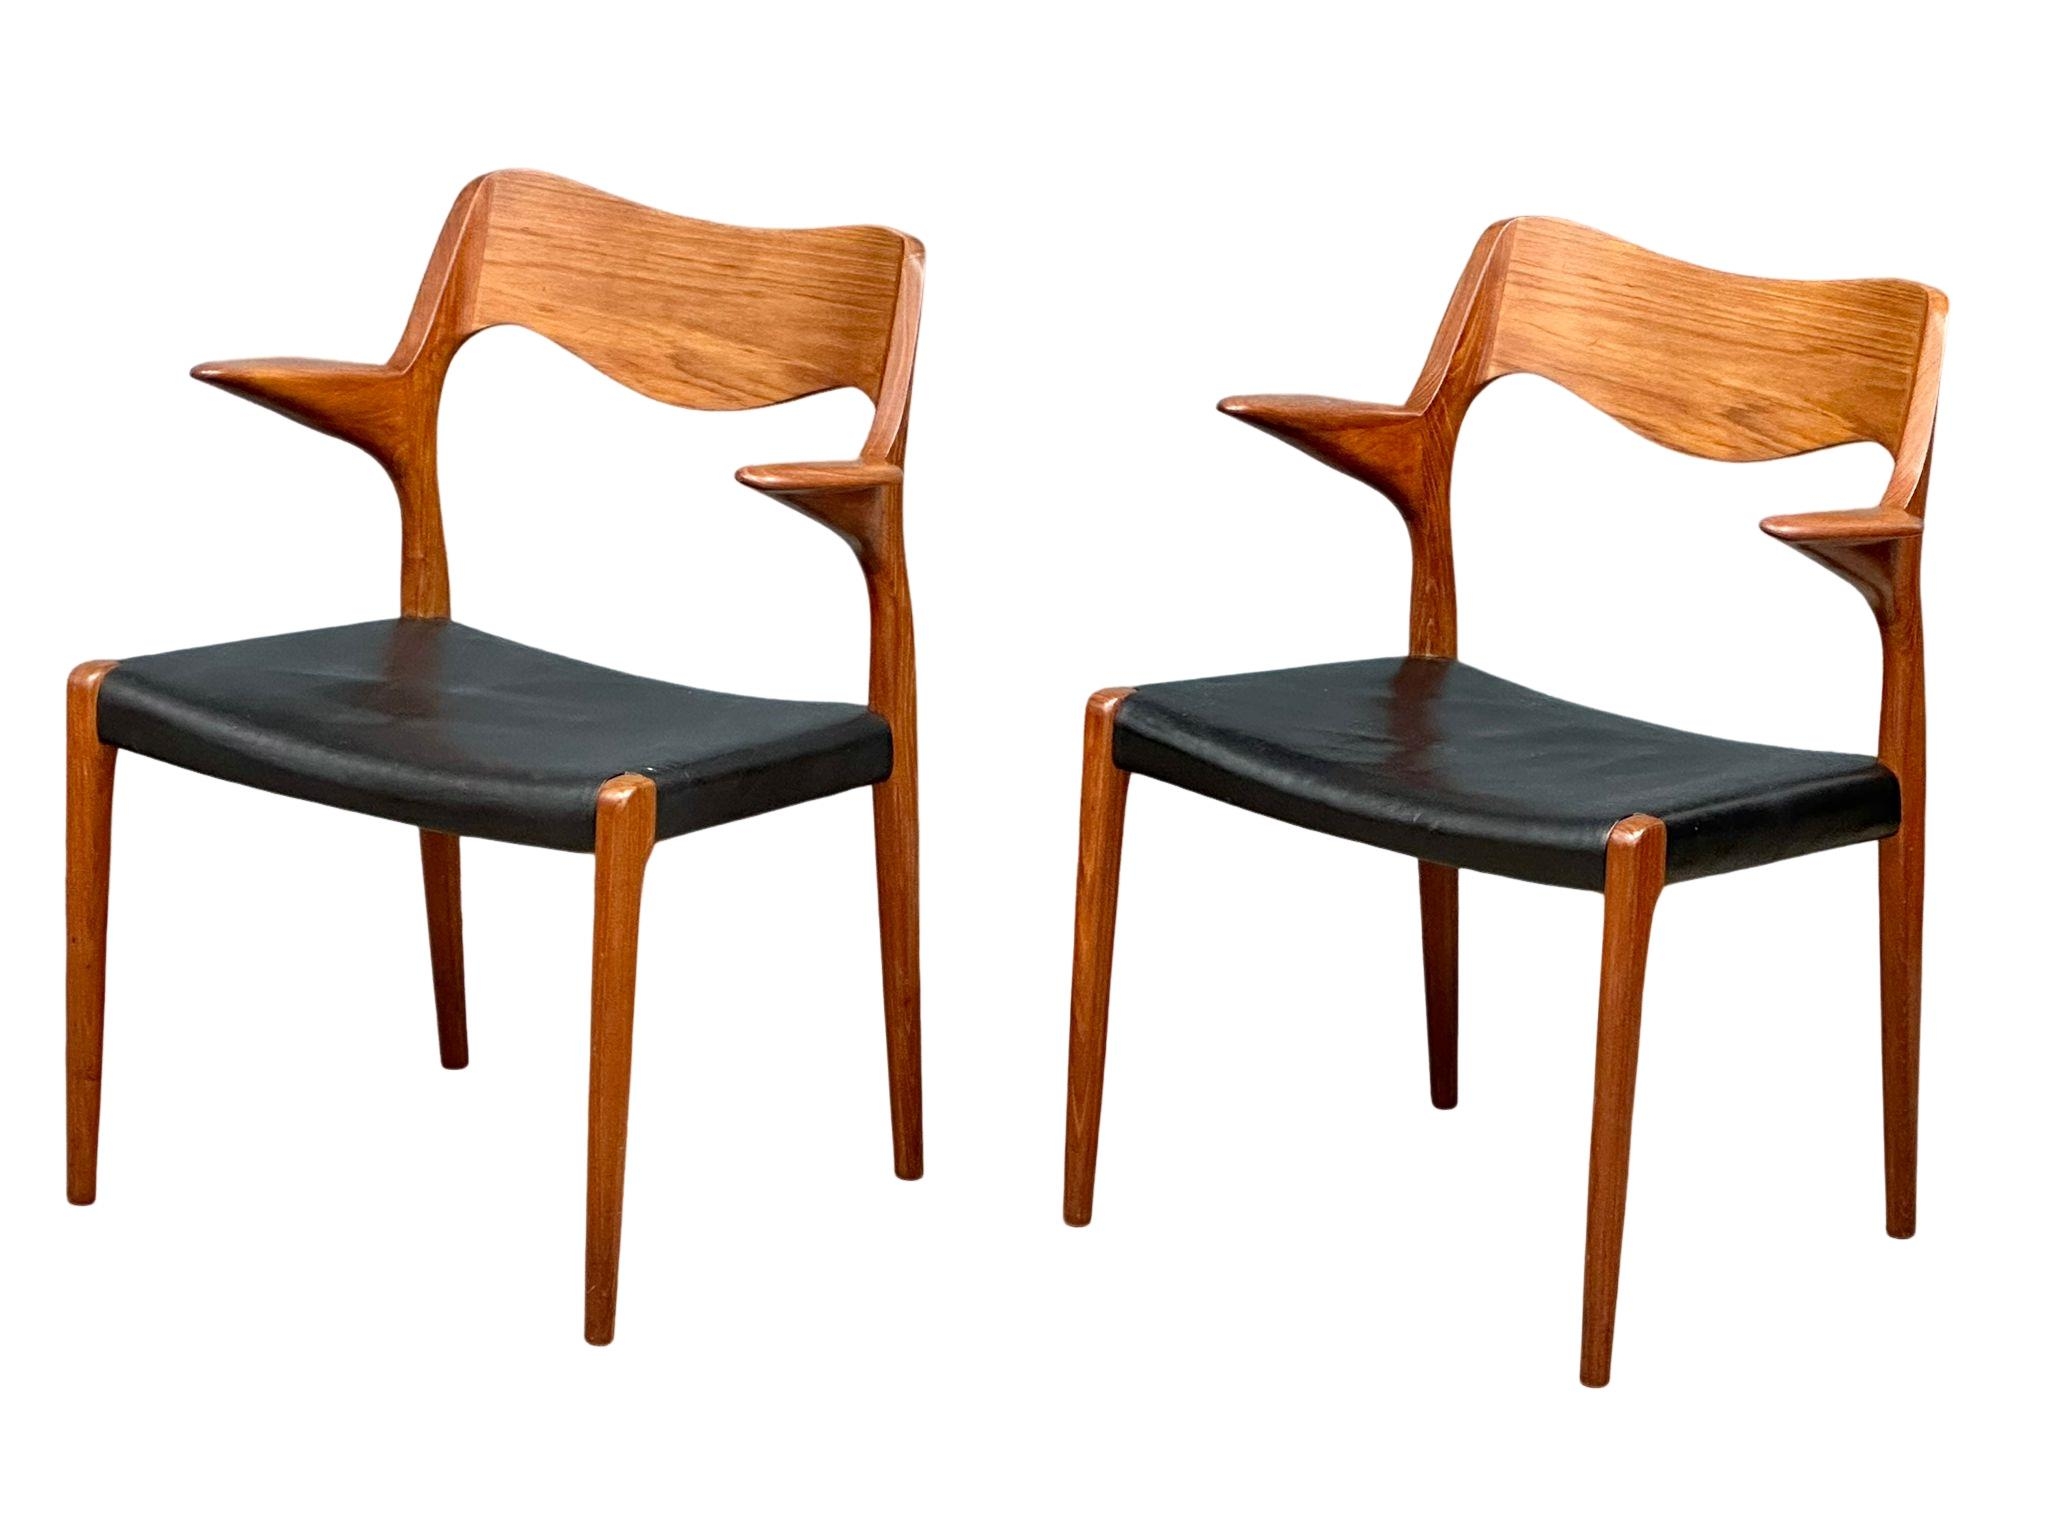 A pair of rare Danish Mid Century teak carver armchairs designed by Niels Otto Moller for J.L. - Image 10 of 12